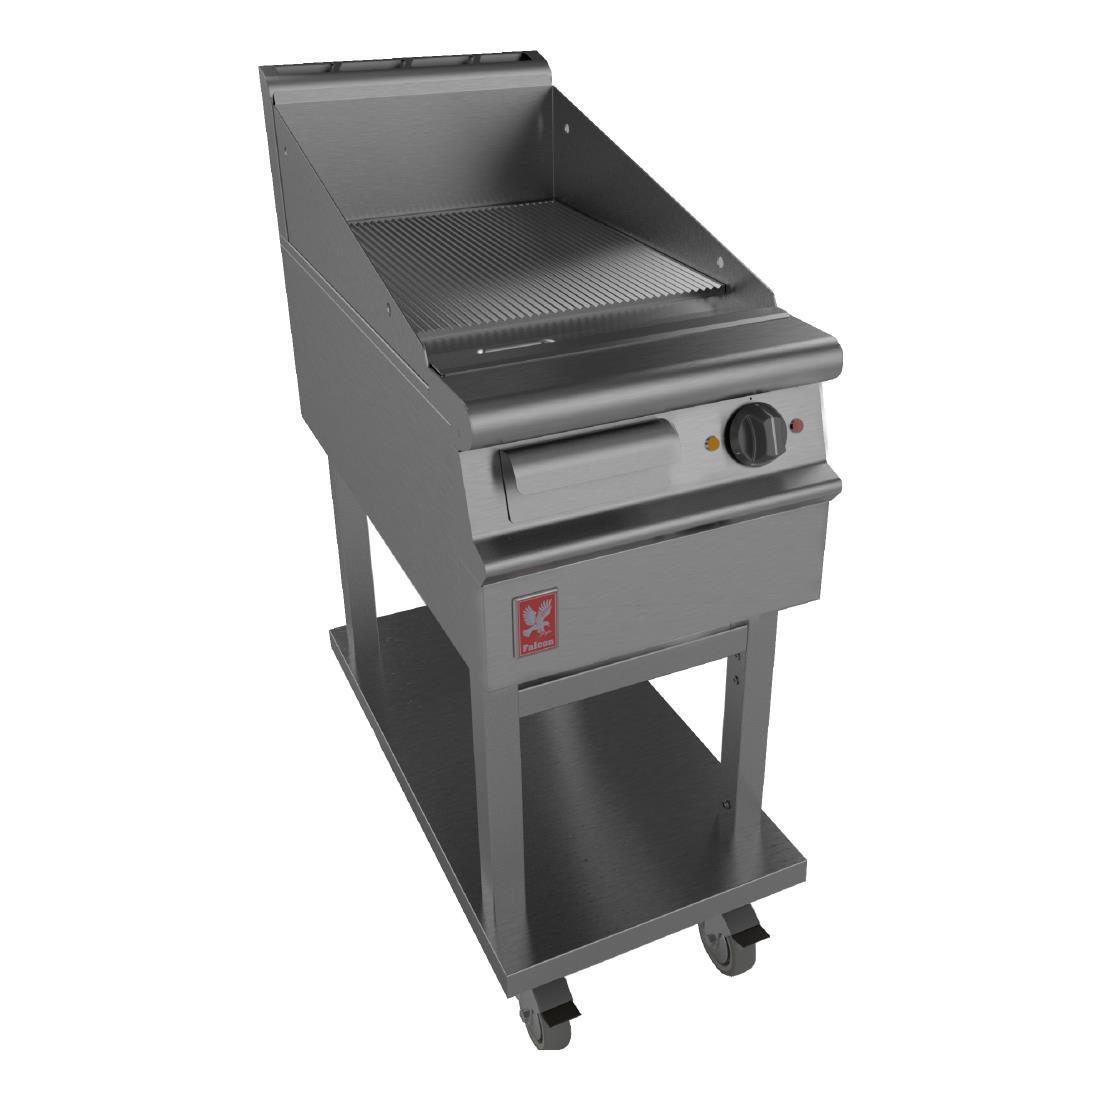 Dominator Plus 400mm Wide Ribbed Griddle on Mobile Stand E3441R - GP103  - 1